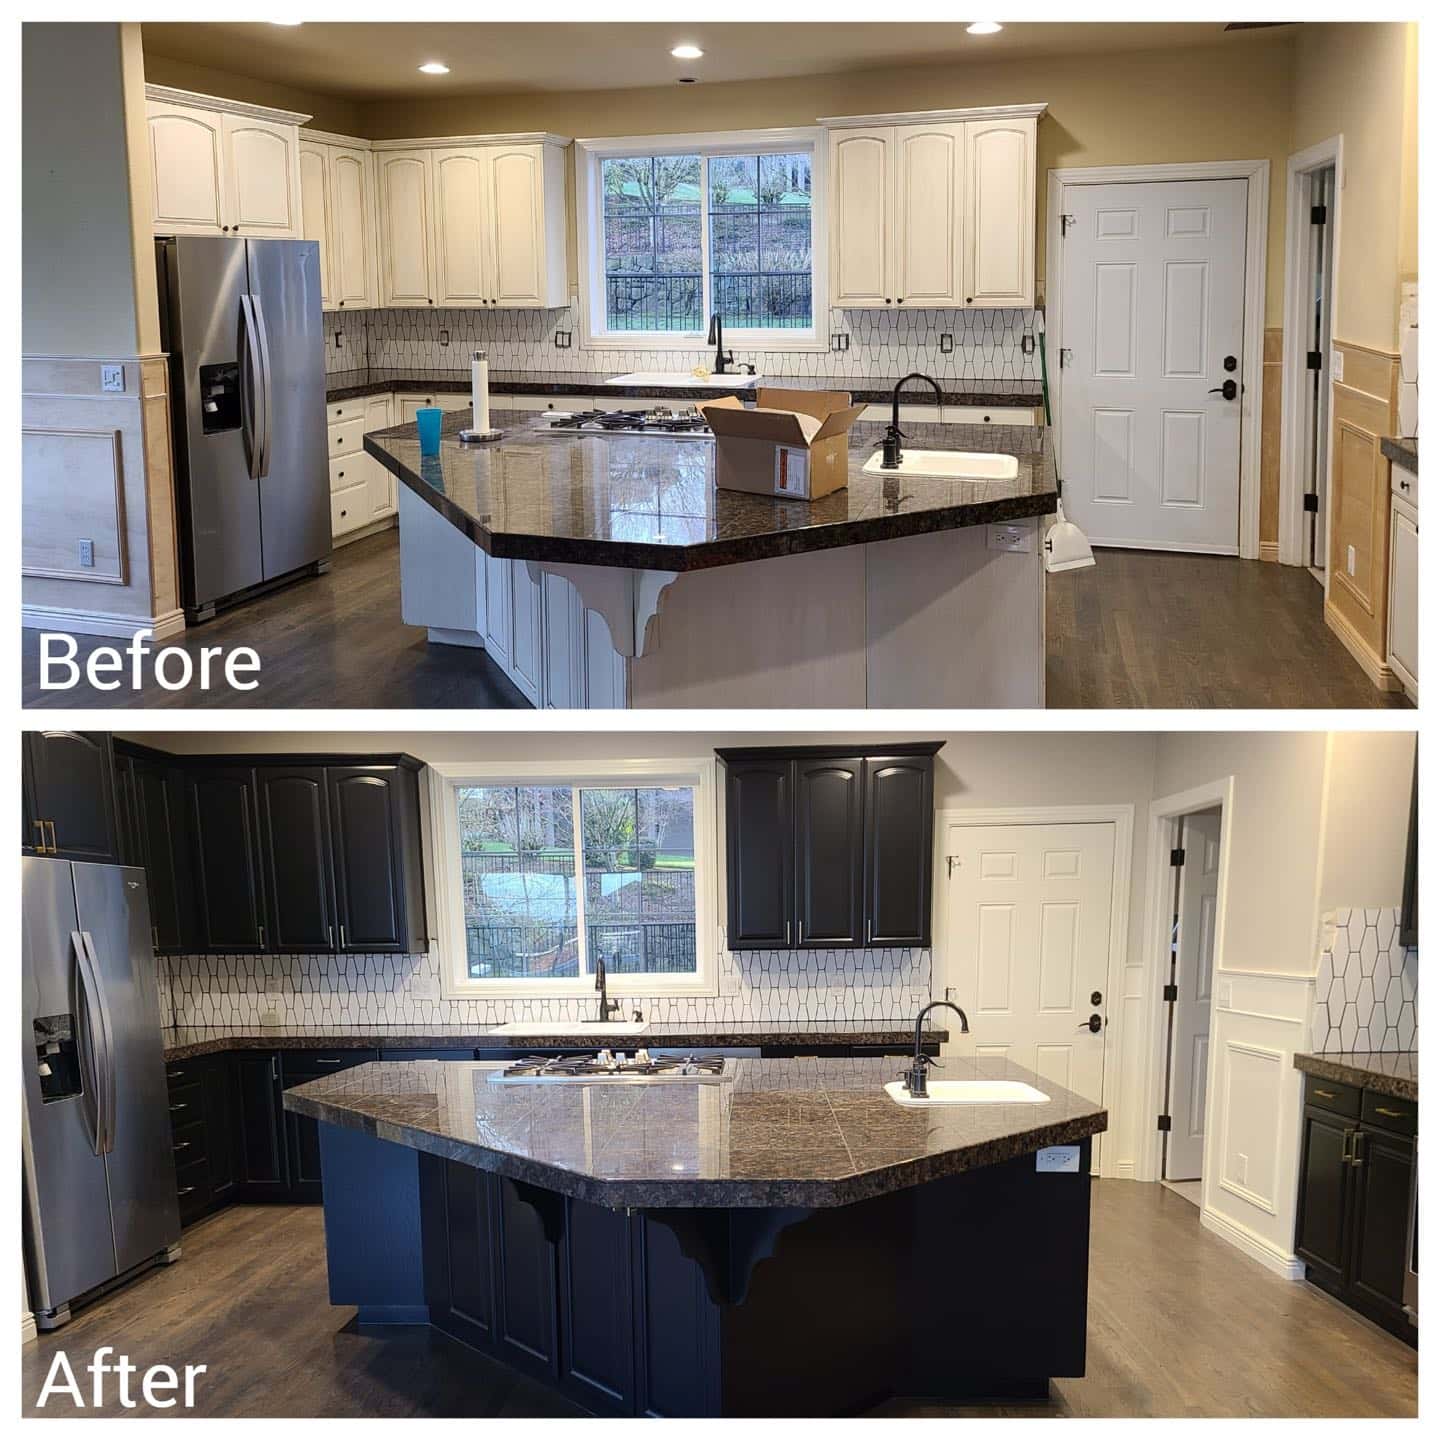 Modern kitchen cabinet transformation in Tigard - before and after pictures of a kitchen with black cabinets.